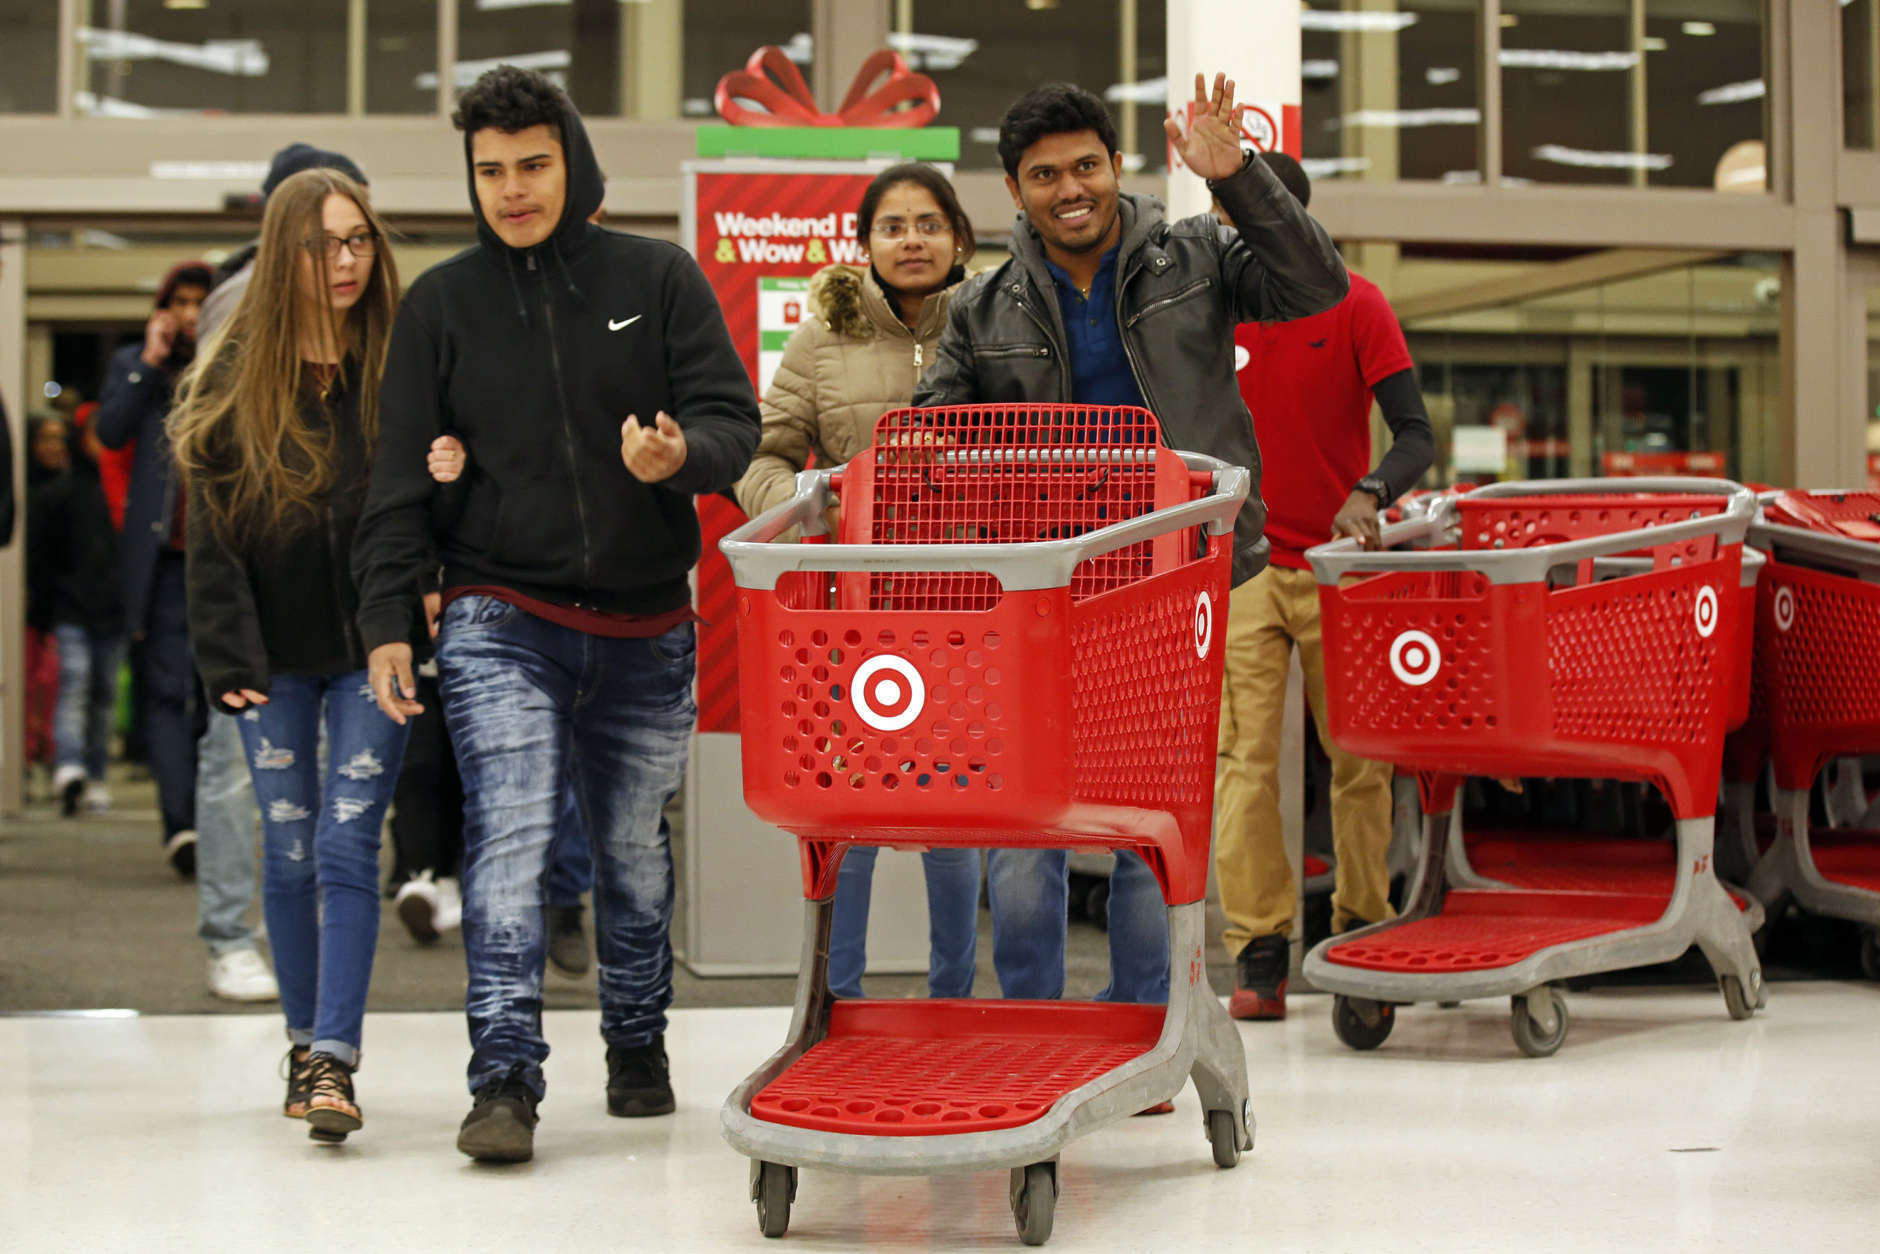 IMAGE DISTRIBUTED FOR TARGET - Guests enter a Target store to take advantage of Target's Black Friday deals and doorbusters on Thursday, Nov. 23, 2017, in Jersey City, N.J. (Adam Hunger/AP Images for Target)